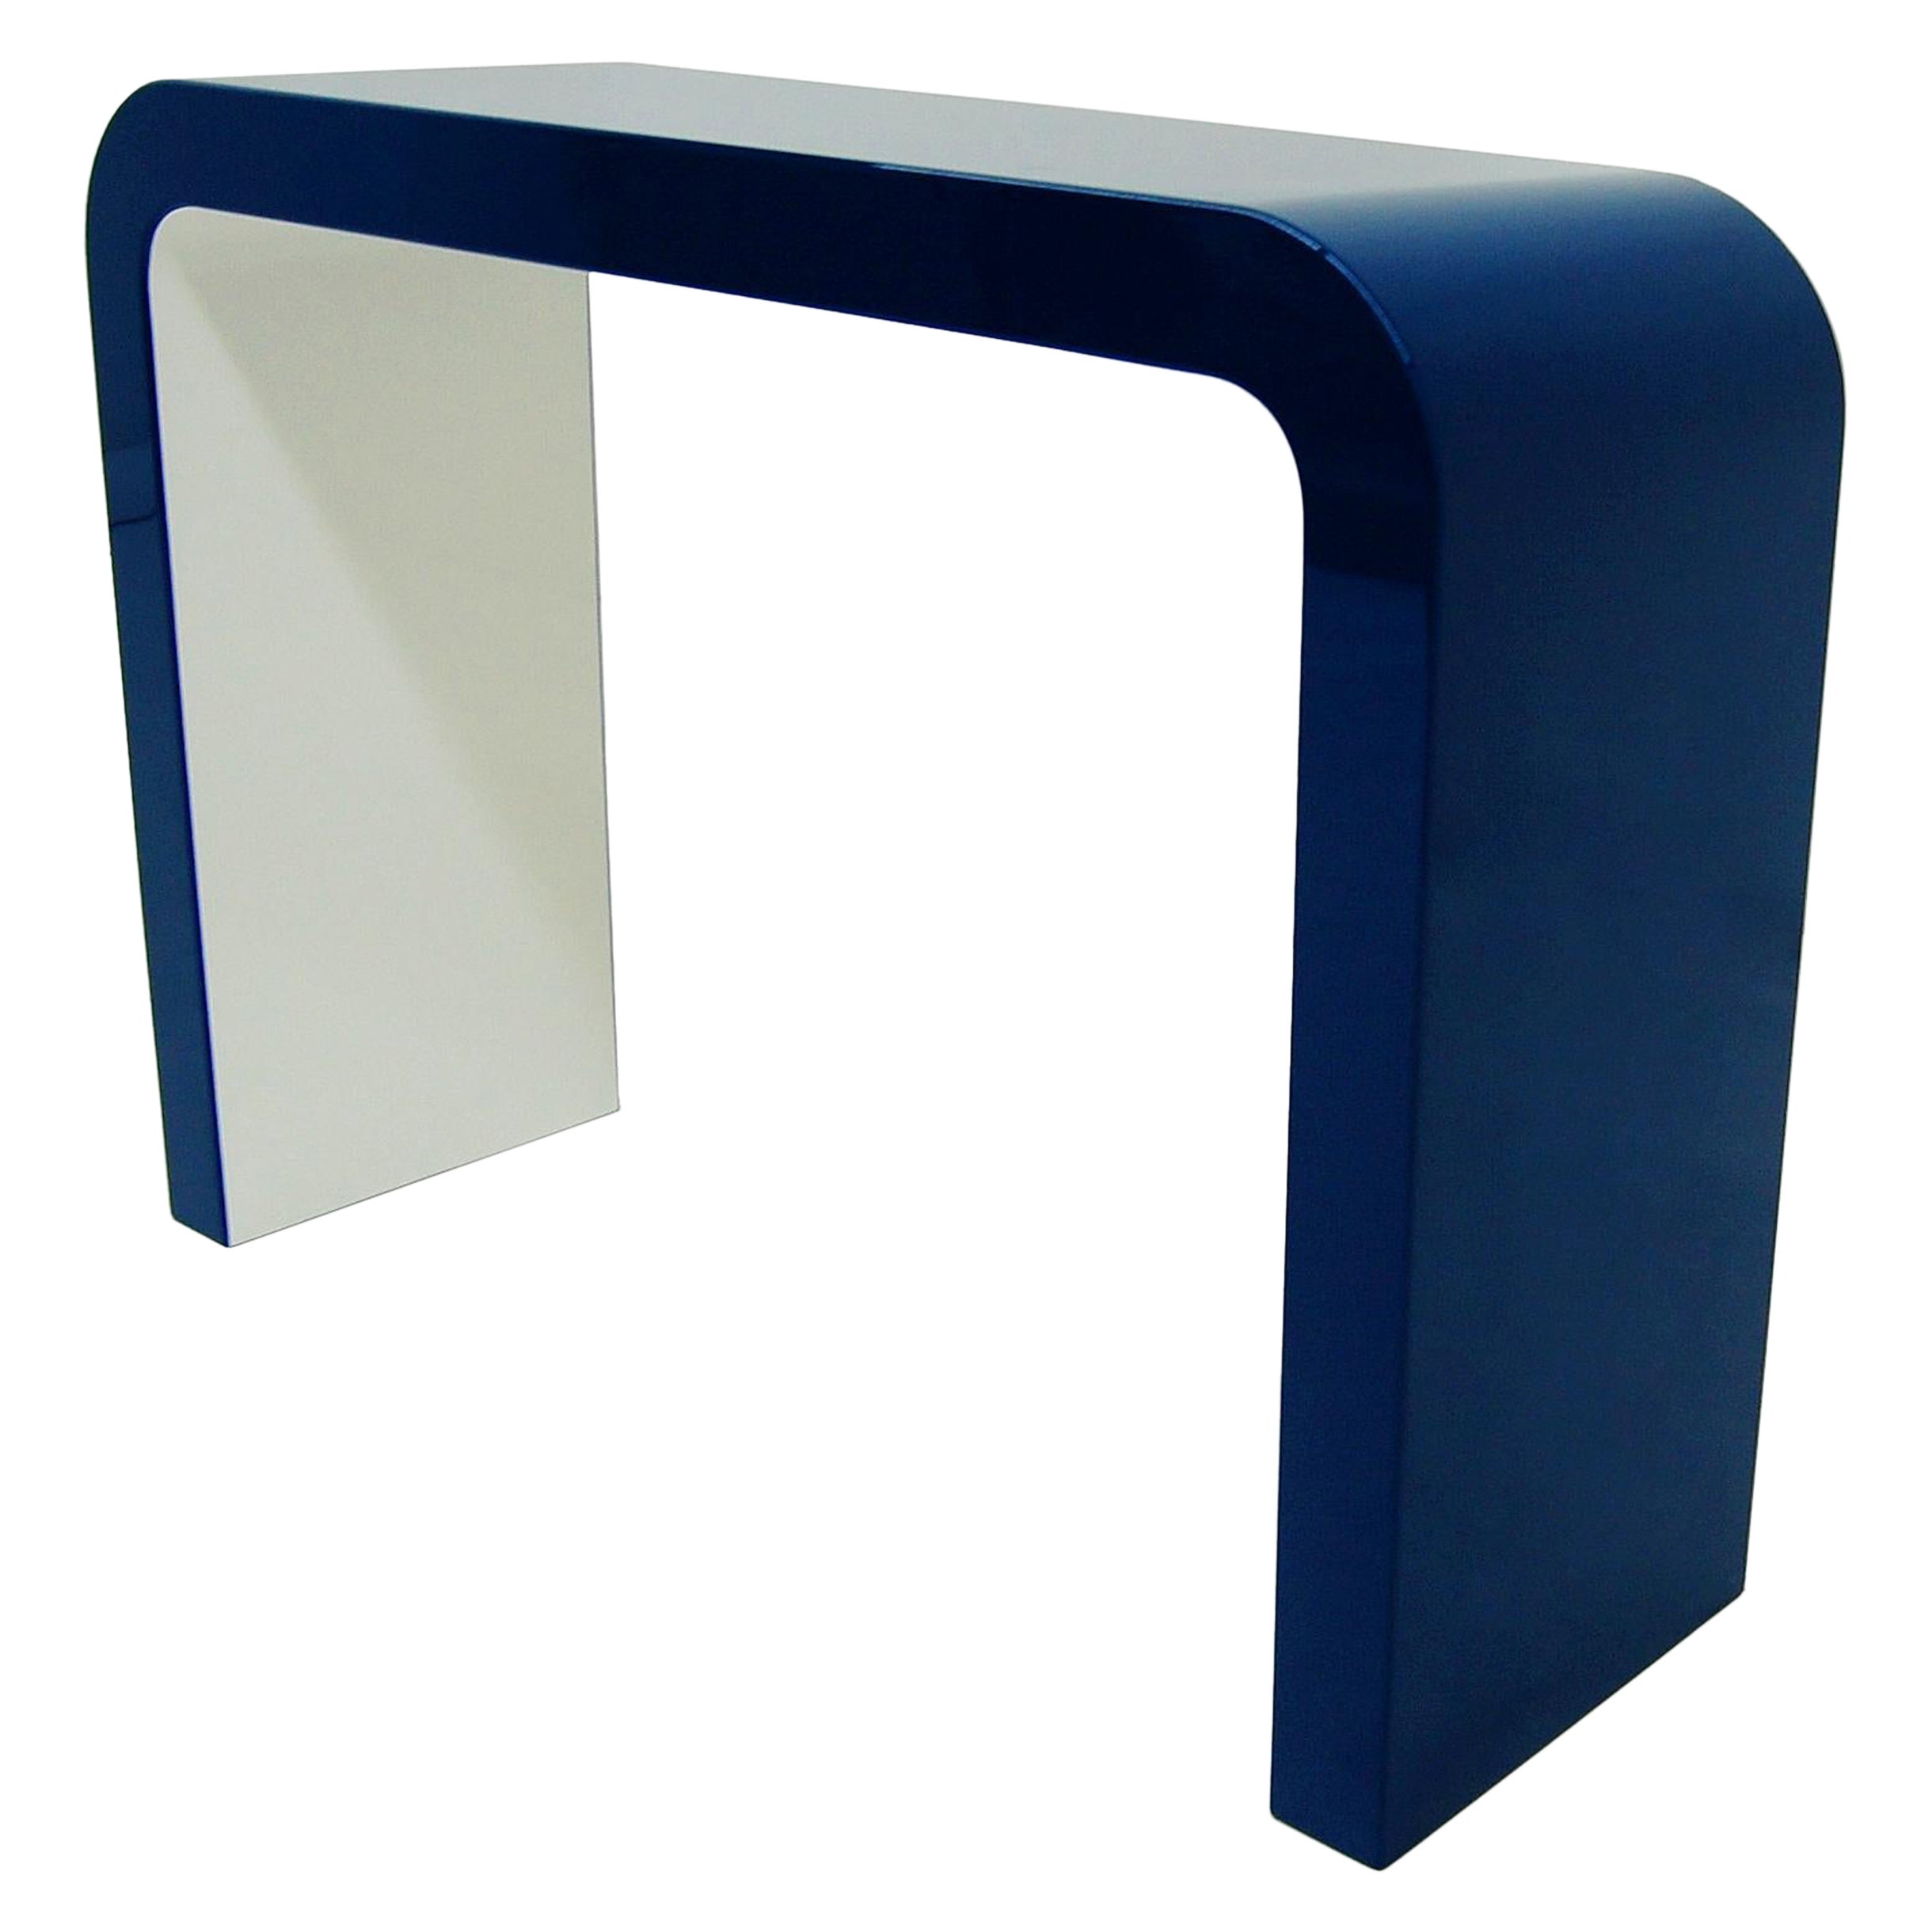 Soho Console Rounded Corners Blue White lacquered  For Sale